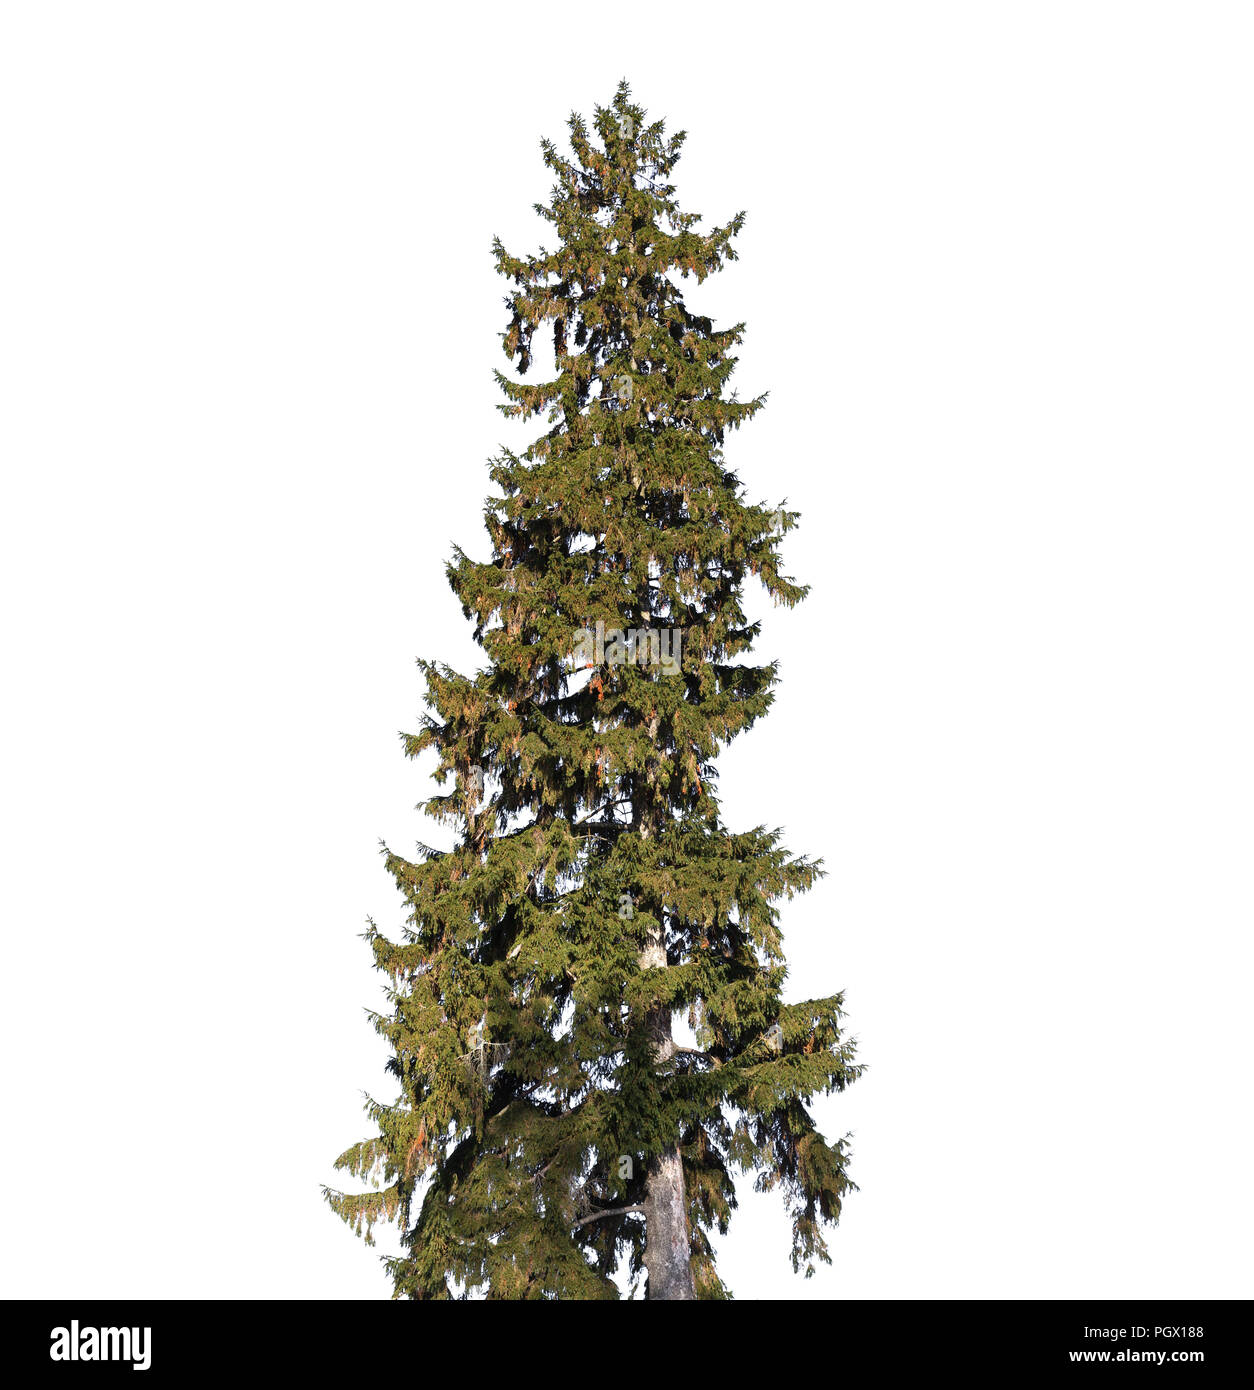 Tall old spruce tree isolated on white background Stock Photo